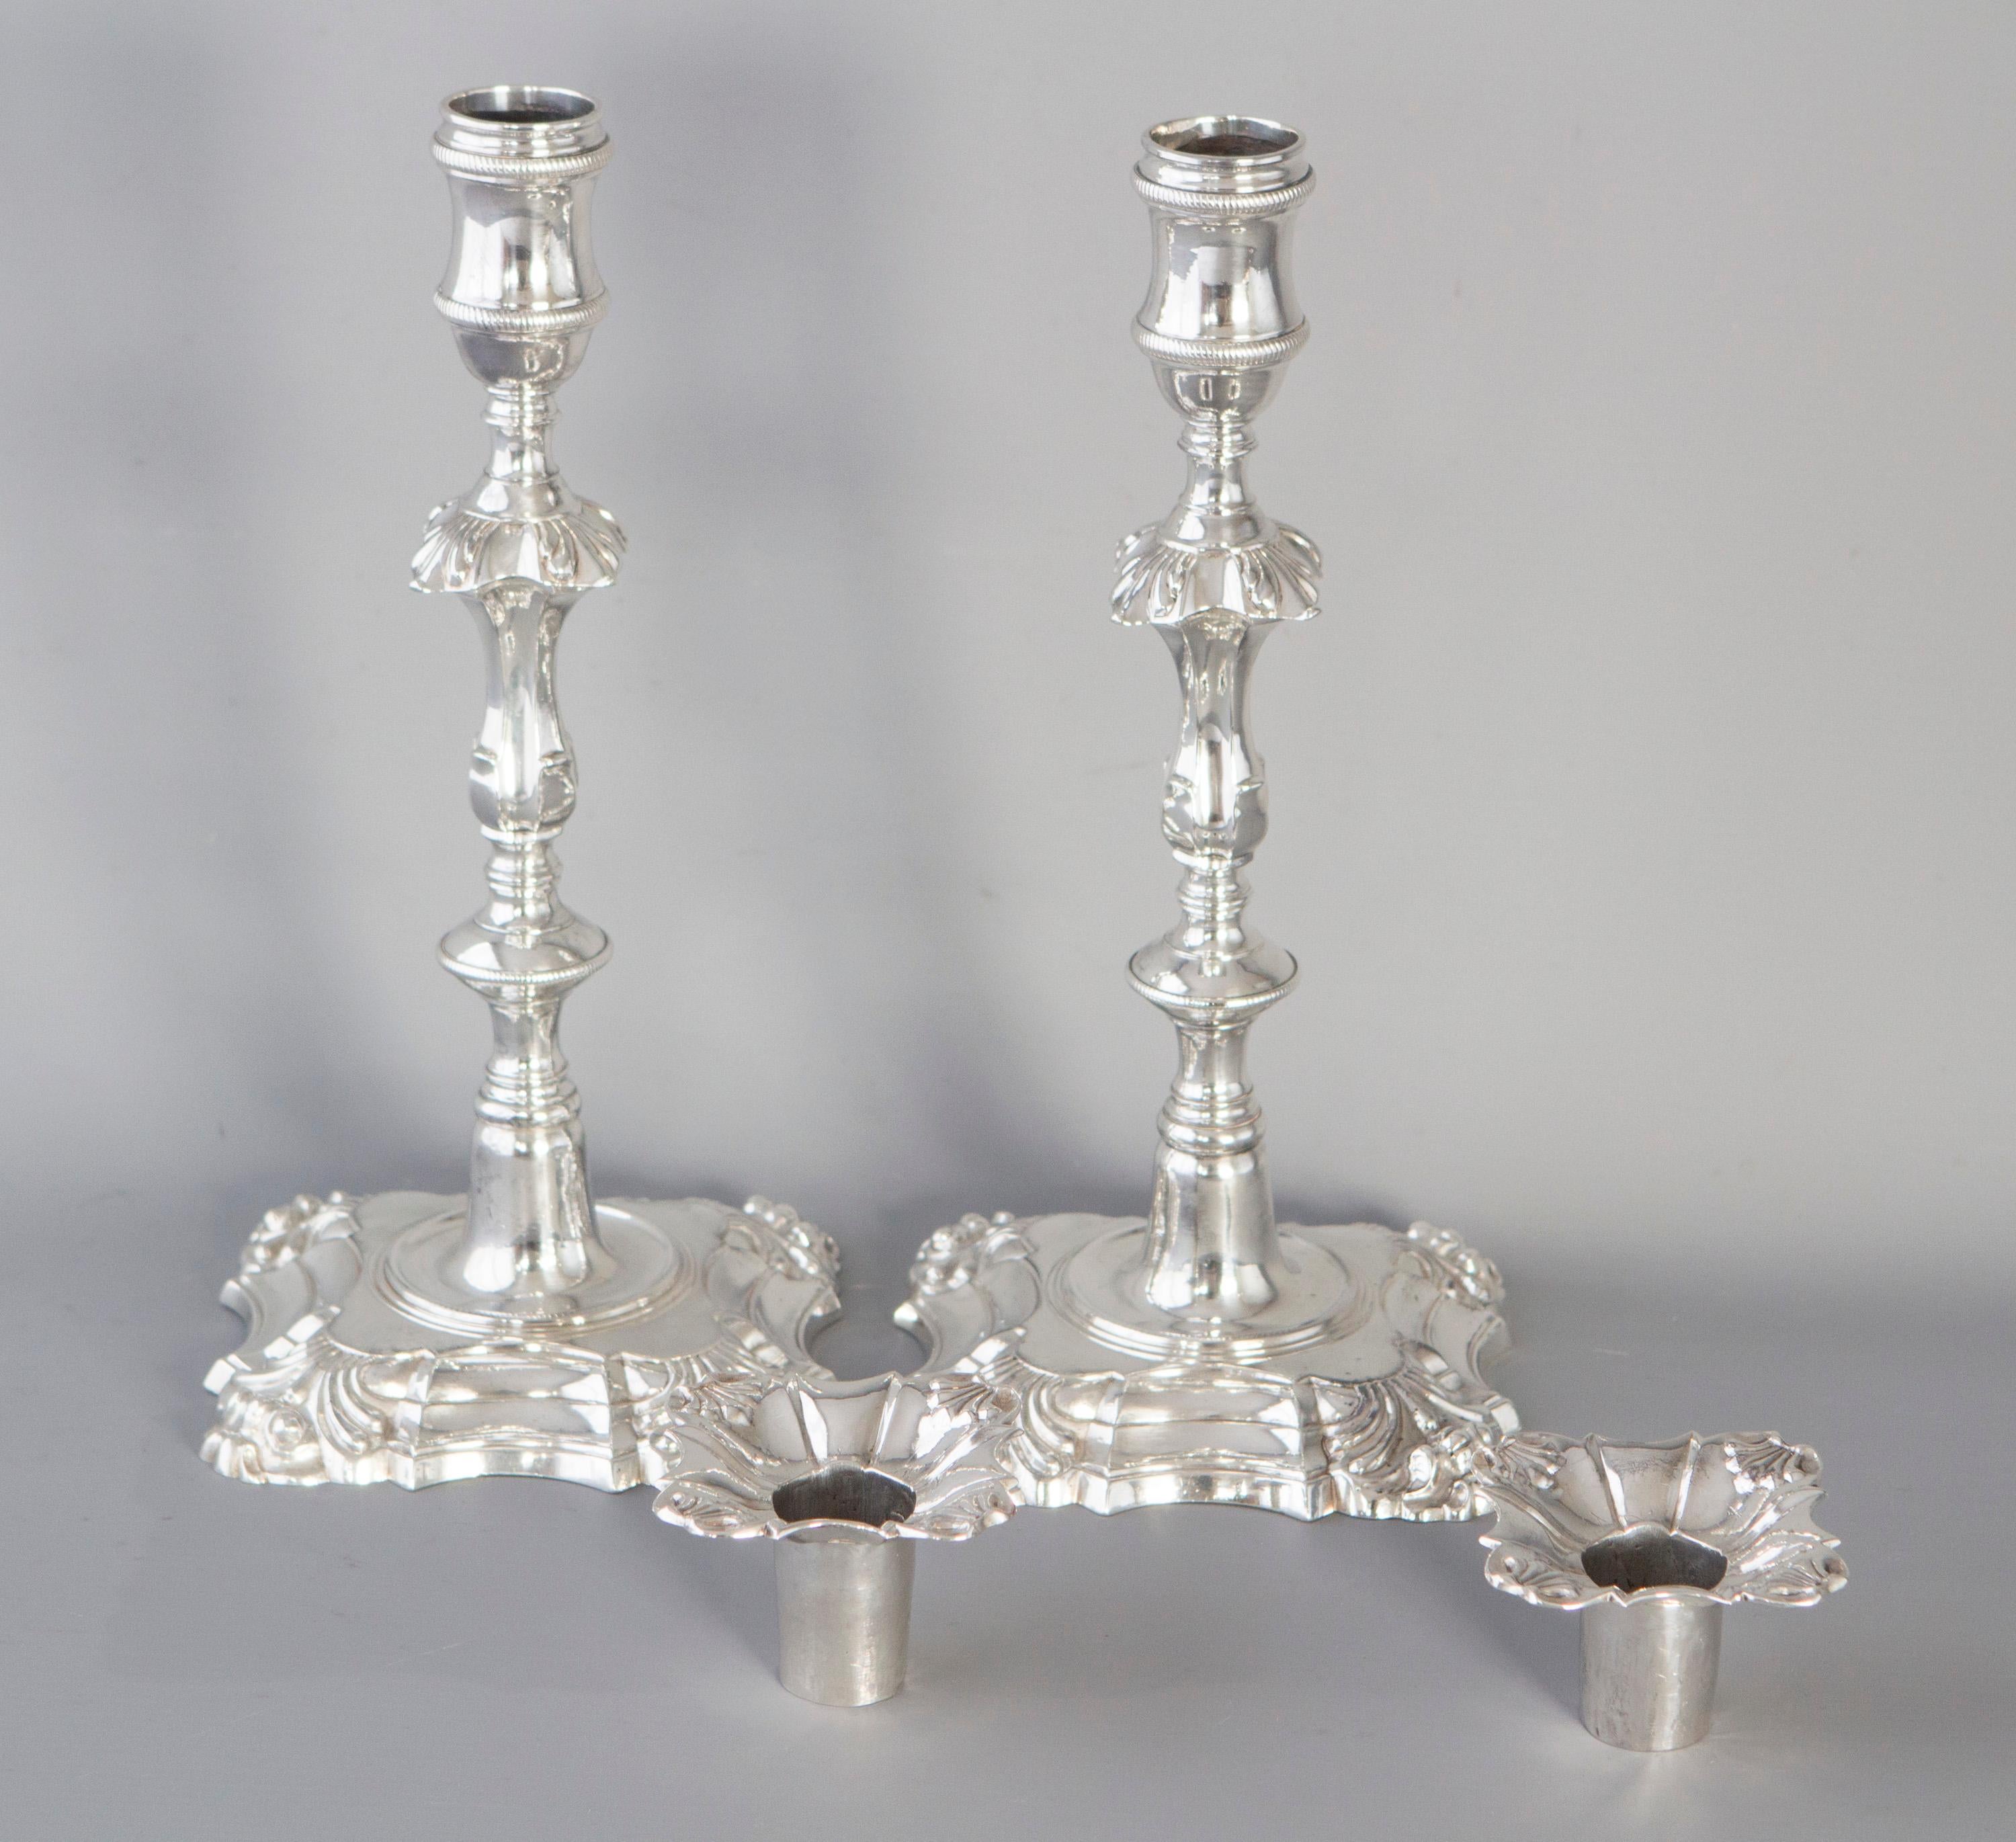 Mid-18th Century Pair of Cast George III Silver Candlesticks, London, 1762